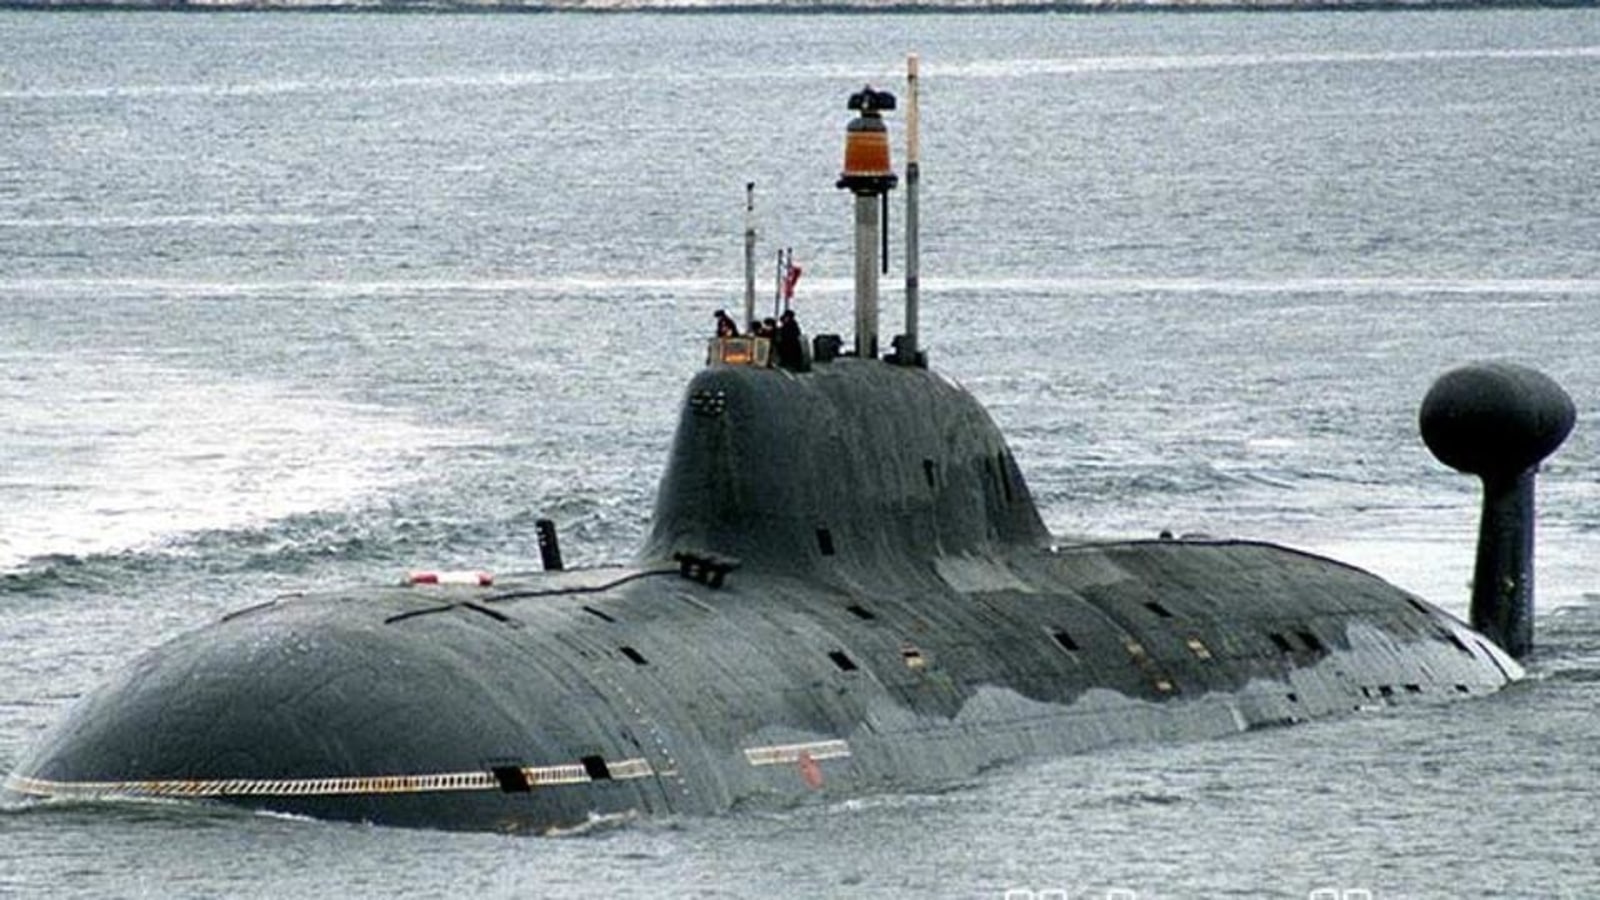 Indian Navy's lone nuclear-powered attack submarine on its way back to